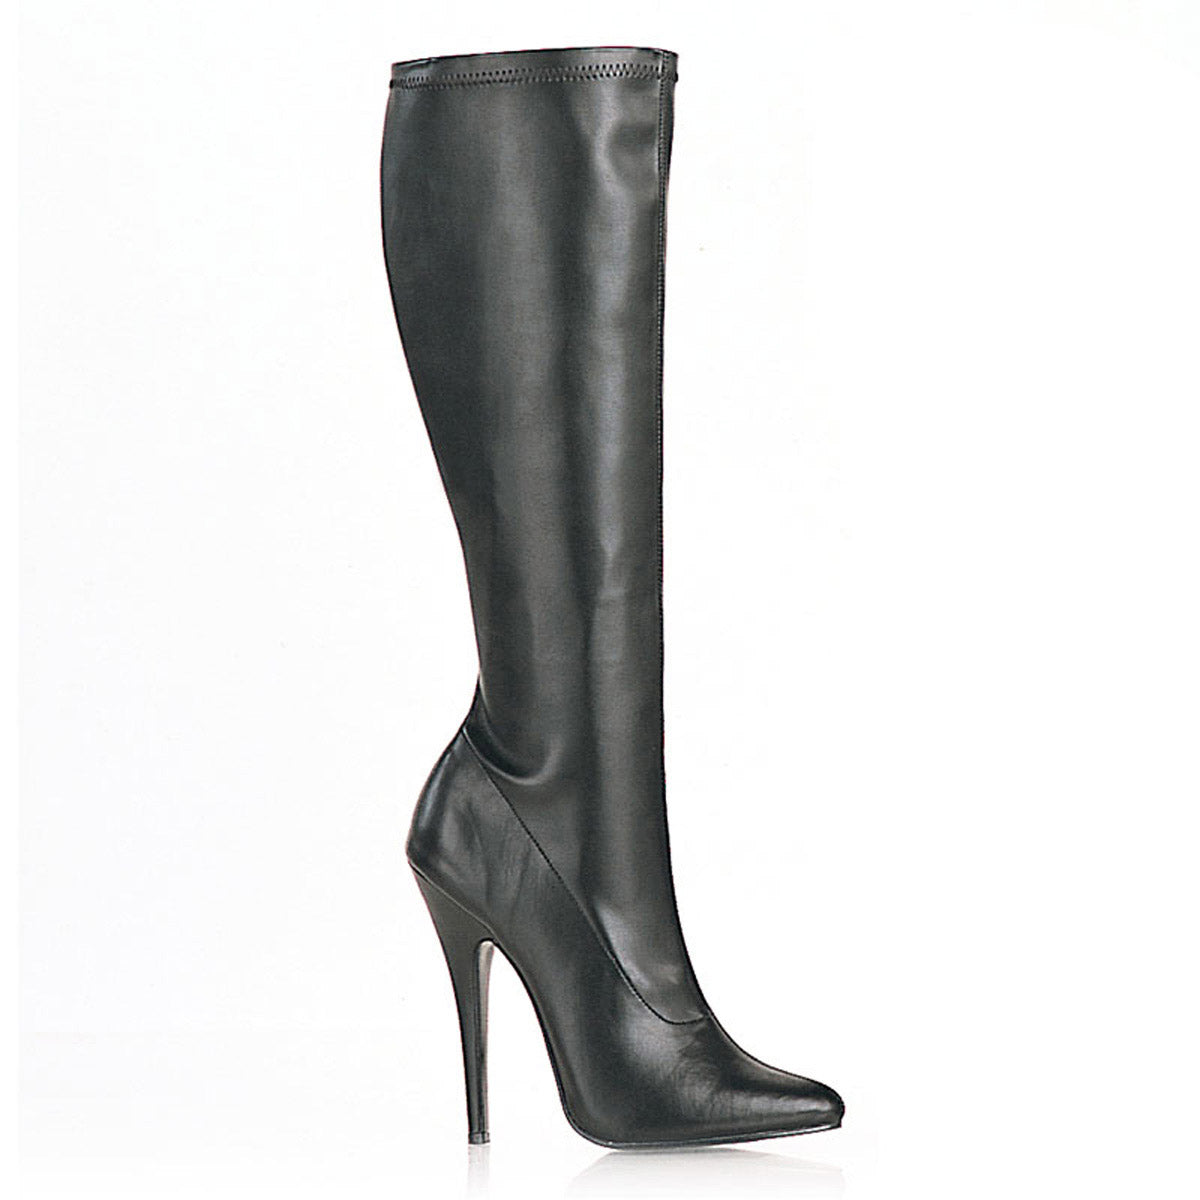 Sexy Inner Side Zip Stretch Knee High Stiletto Heel Boots Shoes Pleaser Devious DOMINA/2000